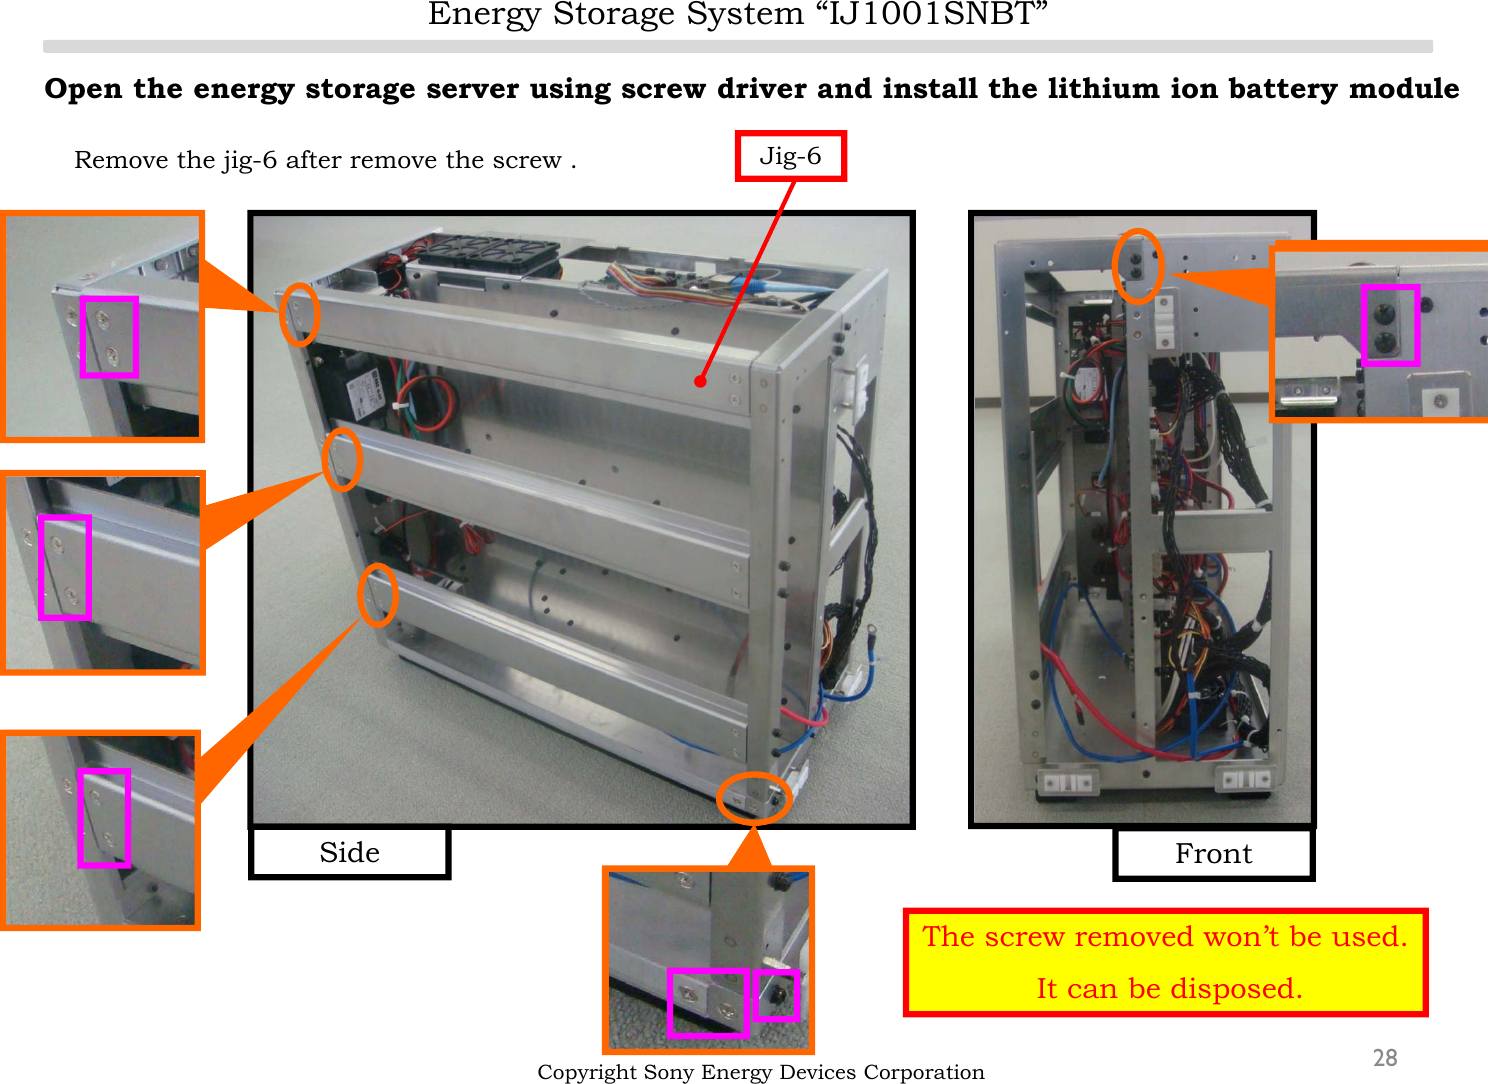 Energy Storage System “IJ1001SNBT”28Open the energy storage server using screw driver and install the lithium ion battery moduleRemove the jig-6 after remove the screw .Copyright Sony Energy Devices CorporationJig-6FrontSideThe screw removed won’t be used.It can be disposed.